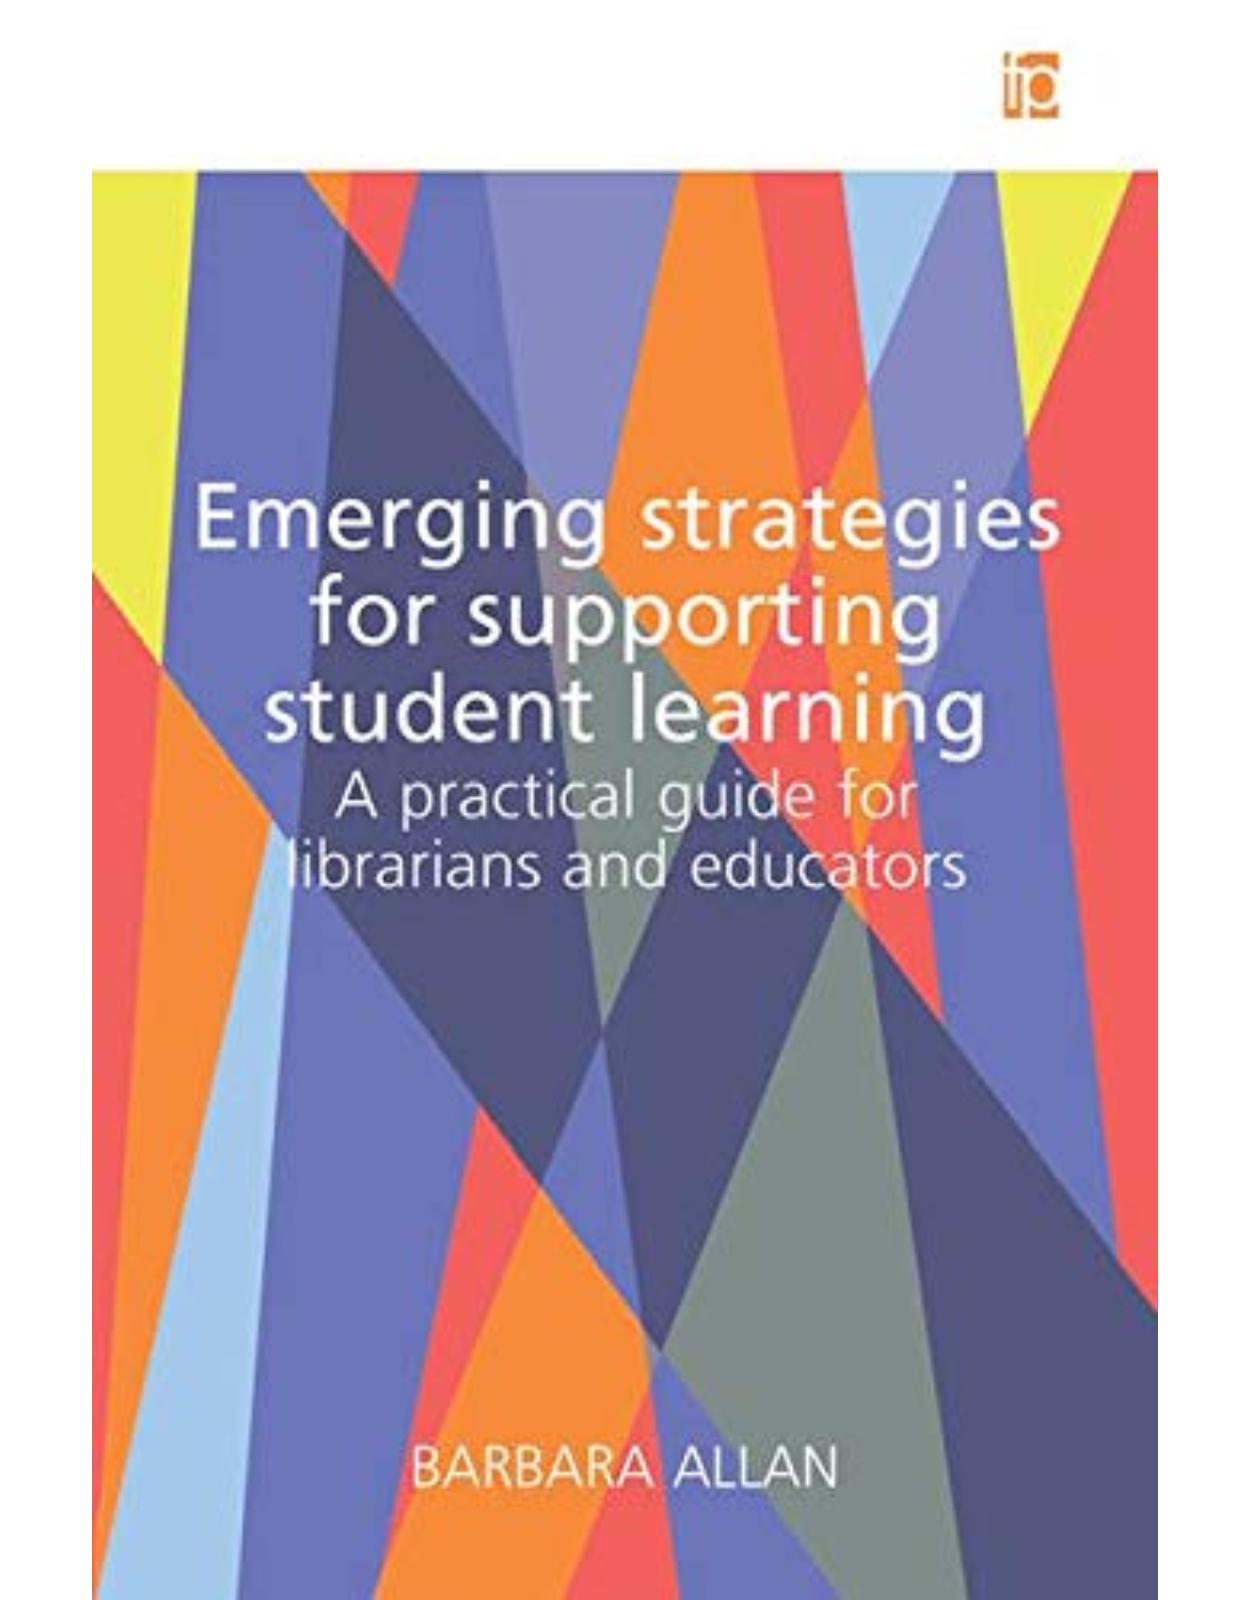 Emerging Strategies for Supporting Student Learning: A practical guide for librarians and educators